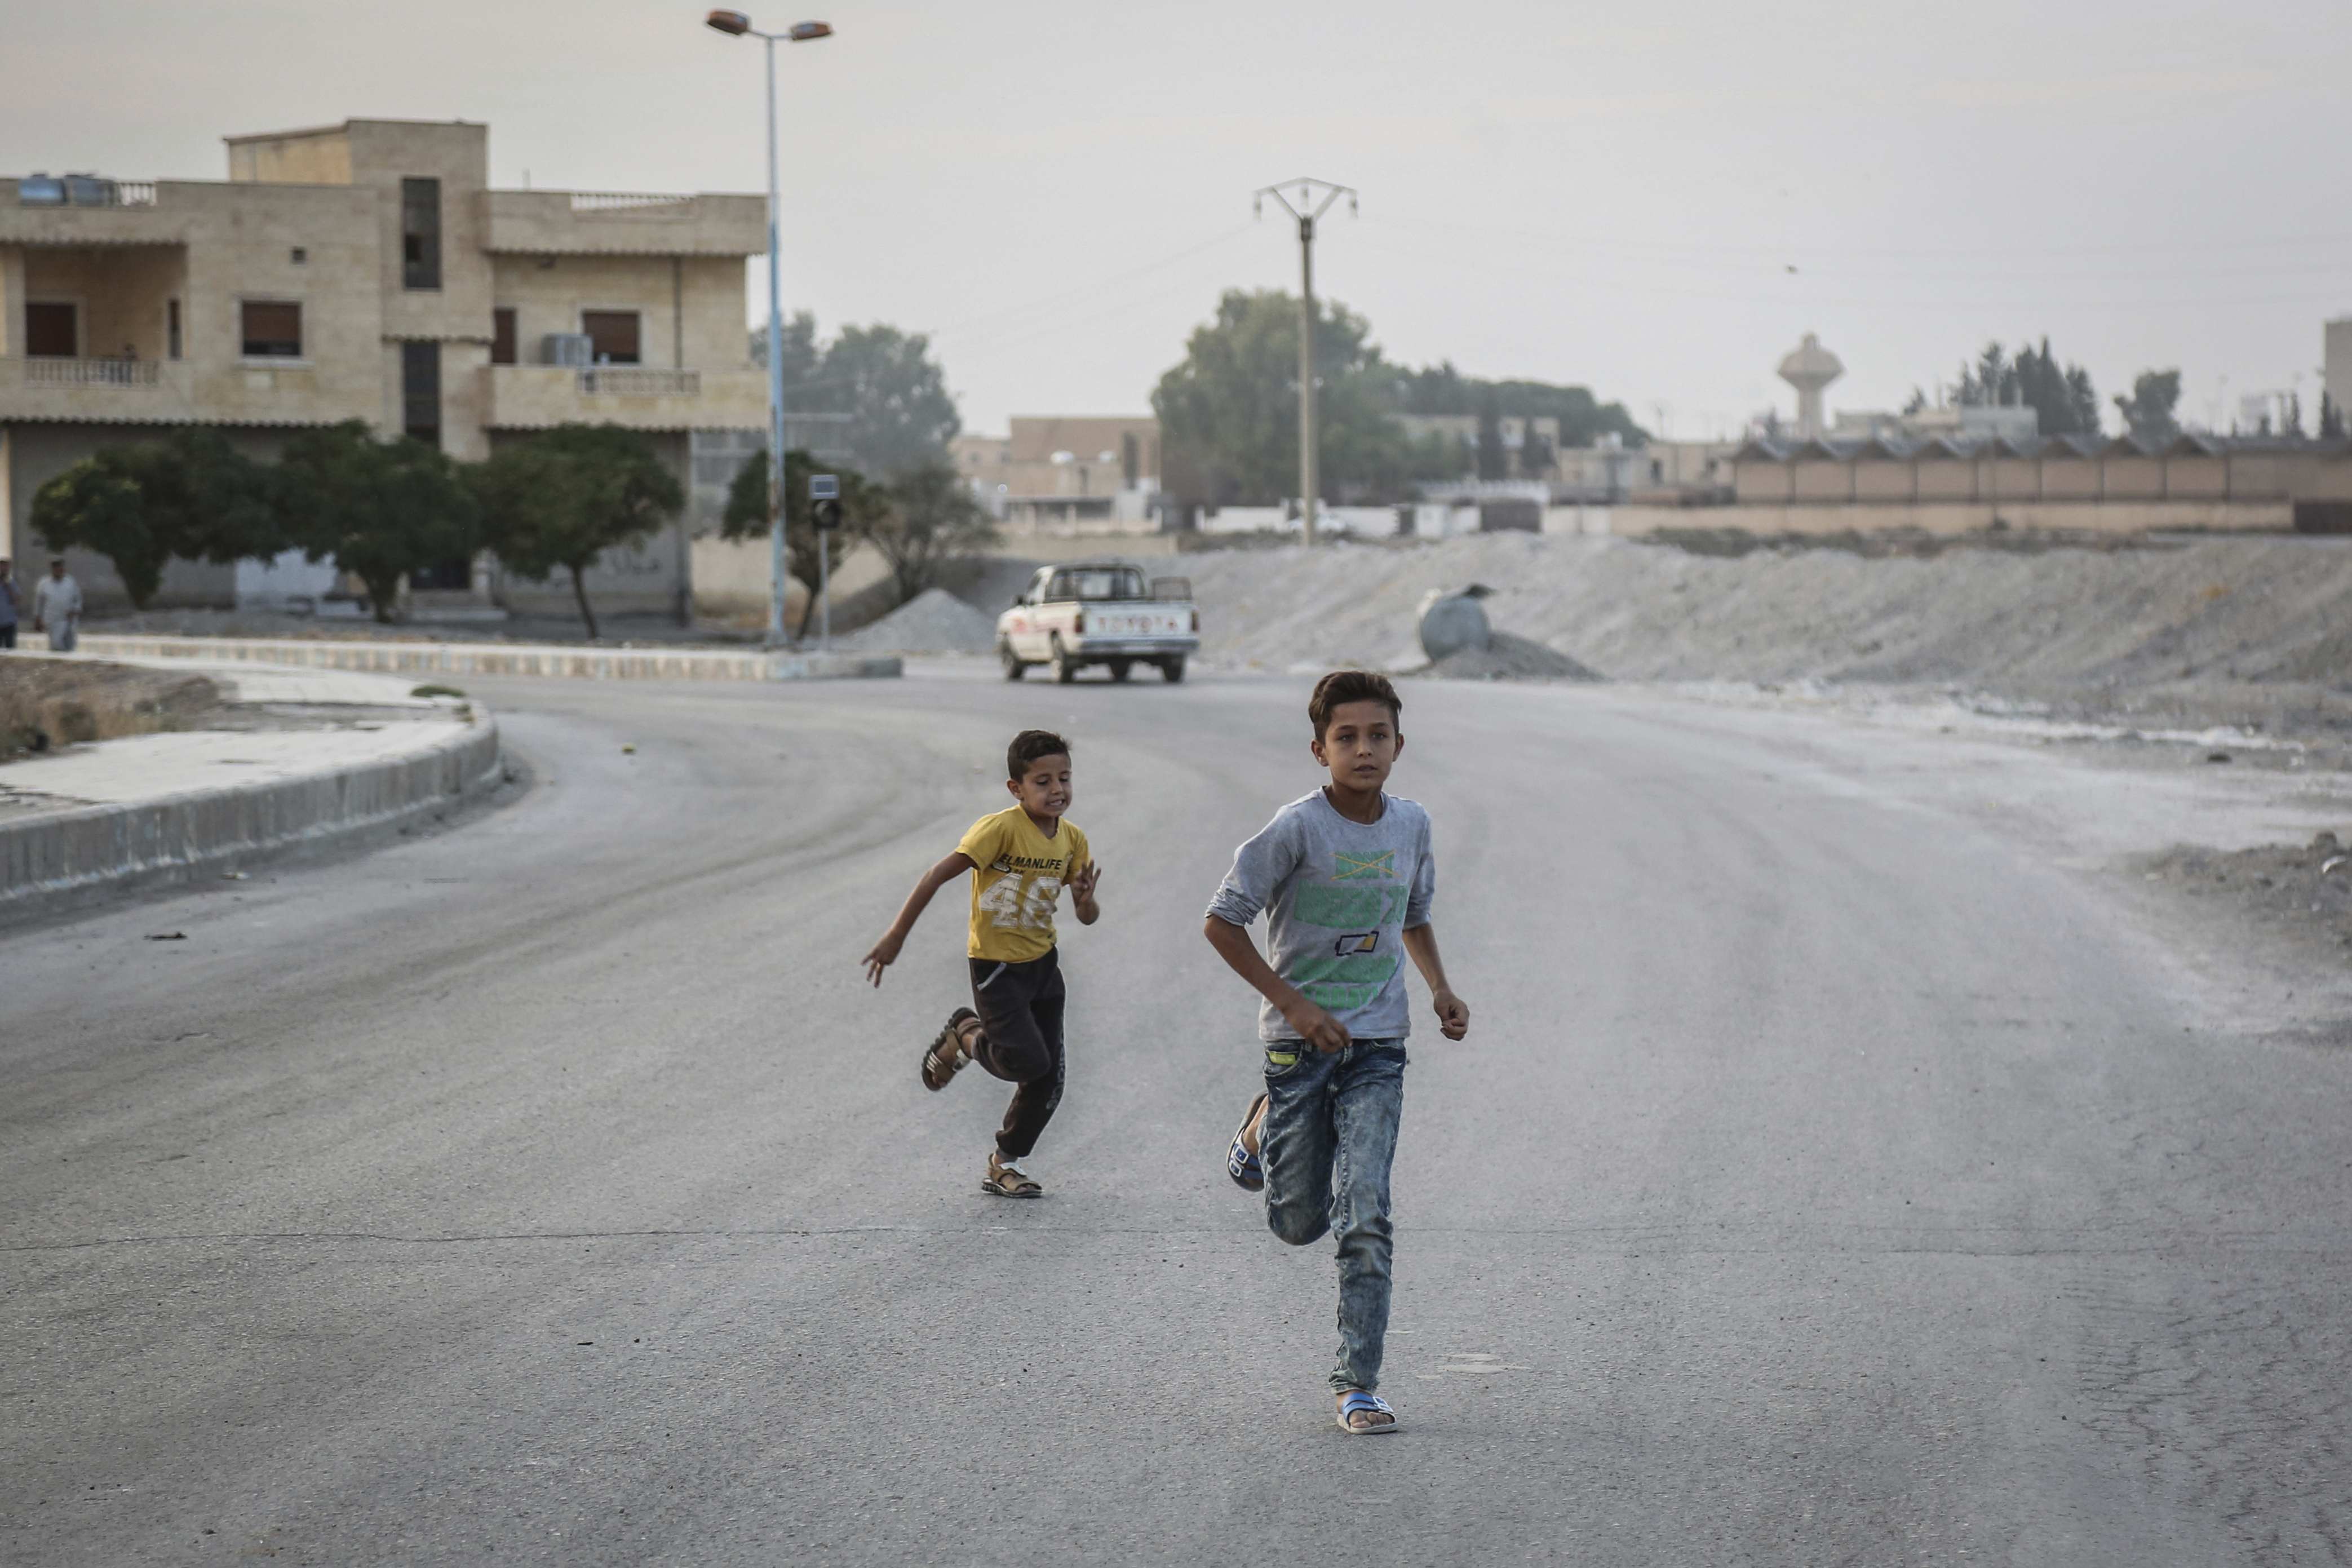 14 October 2019, Syria, Tell Abiad: Two young boys run on a deserted street. Photo by: Anas Alkharboutli/picture-alliance/dpa/AP Images